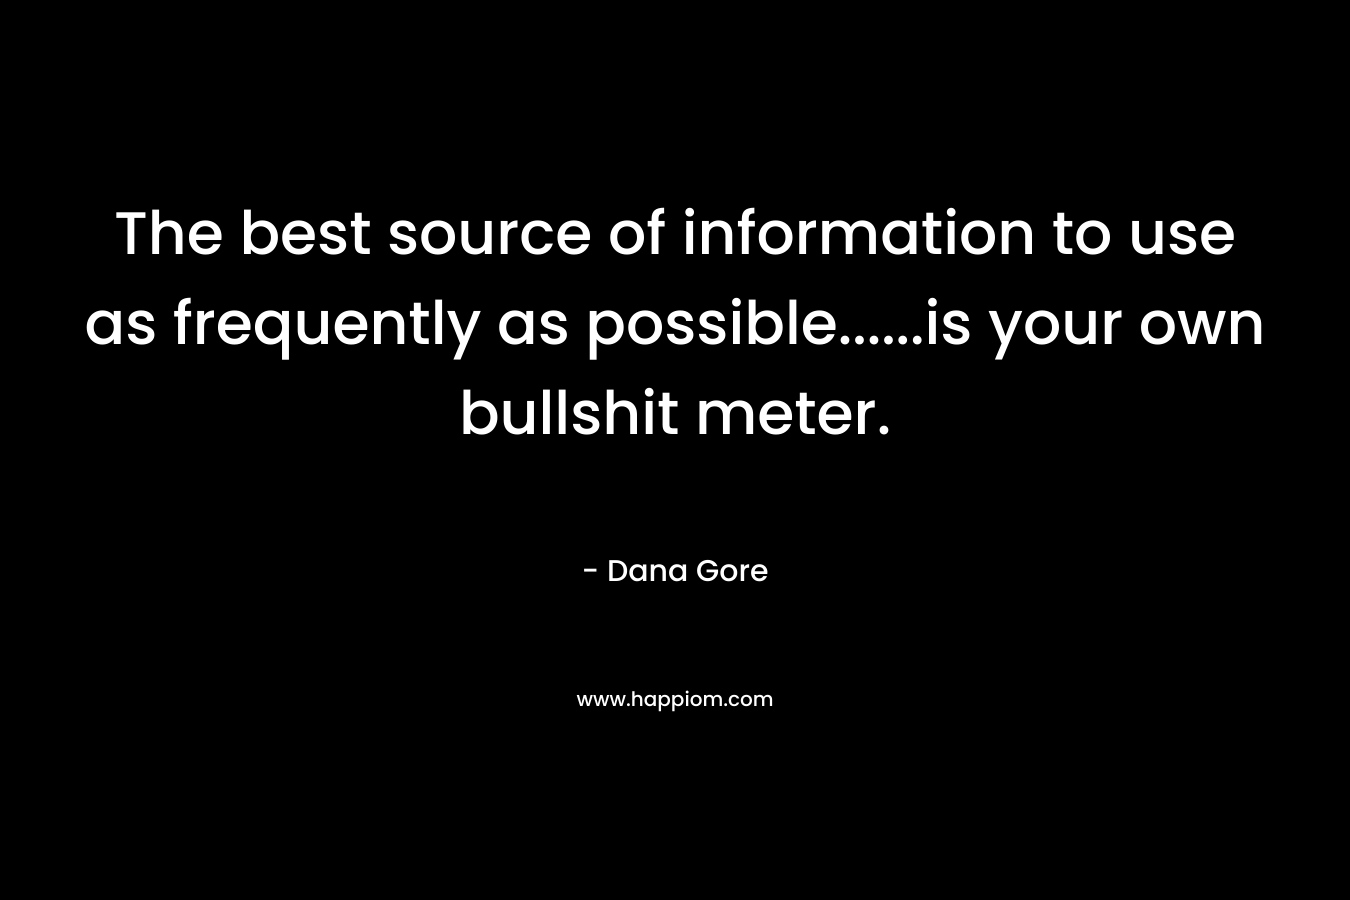 The best source of information to use as frequently as possible……is your own bullshit meter. – Dana Gore